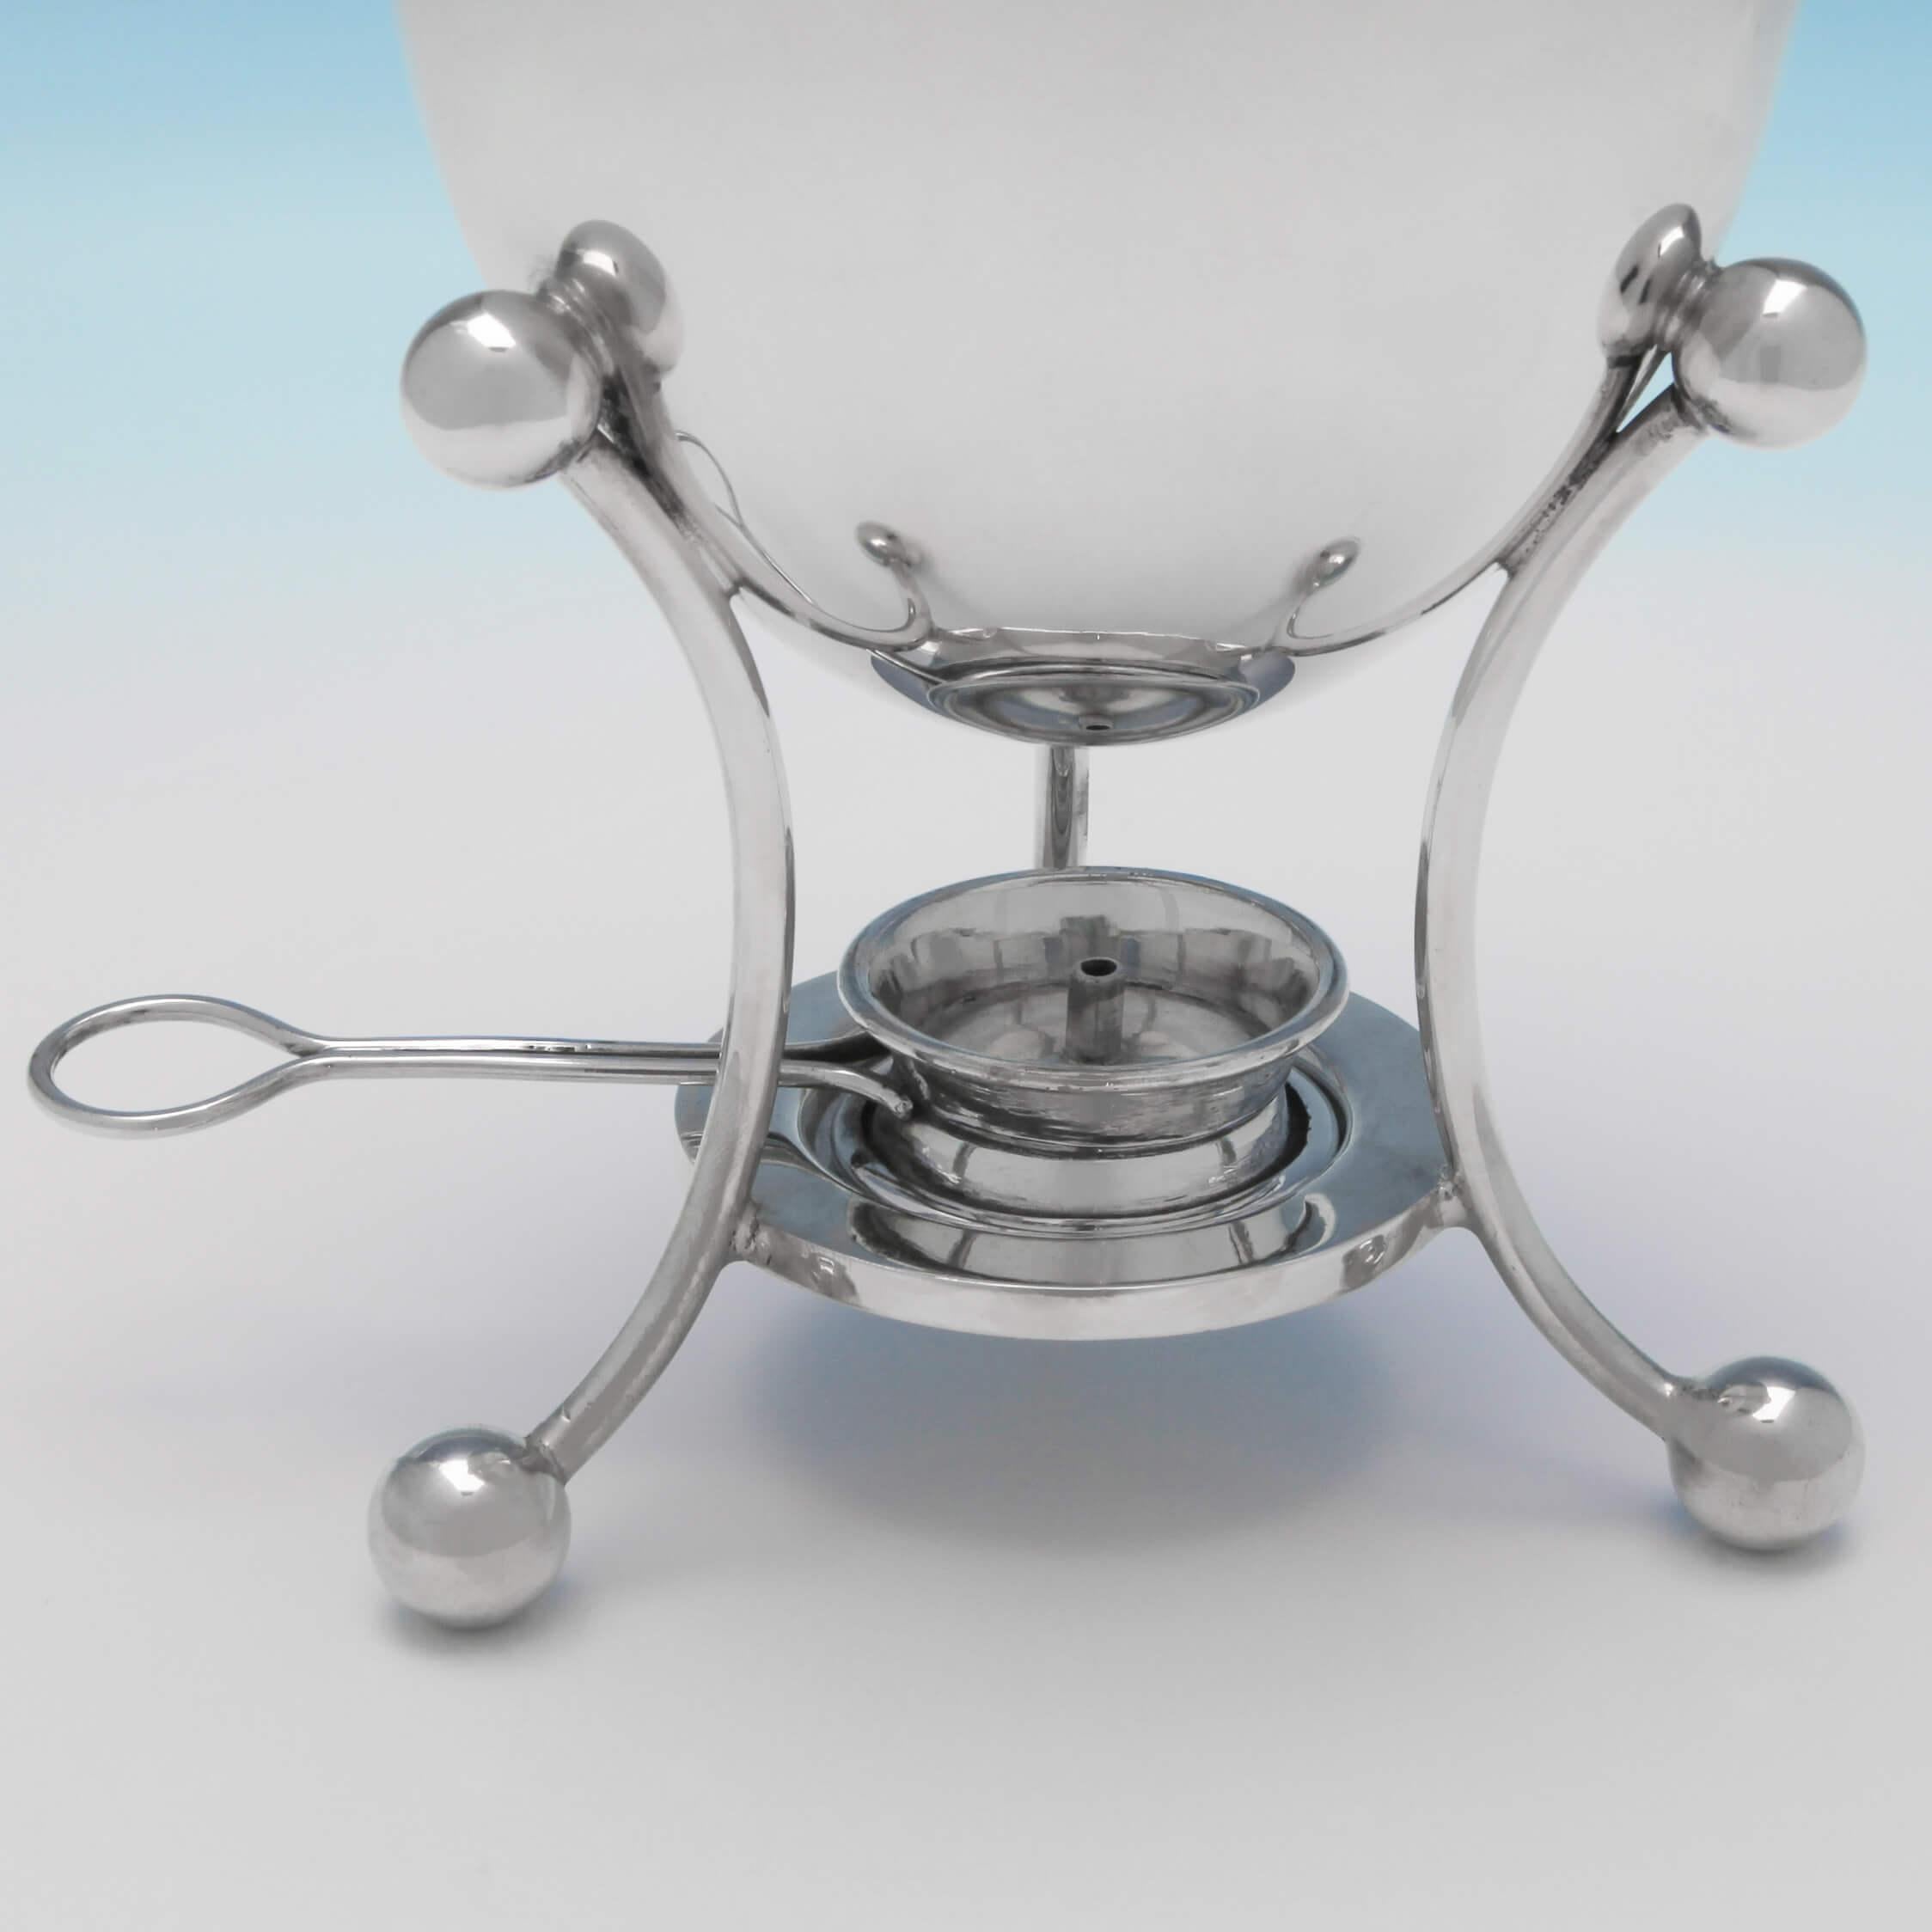 Made circa 1900 by Mappin & Webb and used to cook eggs at the table or on a picnic, this handsome, Edwardian, antique, silver plate egg coddler, has an egg shaped body with a lift off lid and wooden finial, supported by a frame with ball feet that